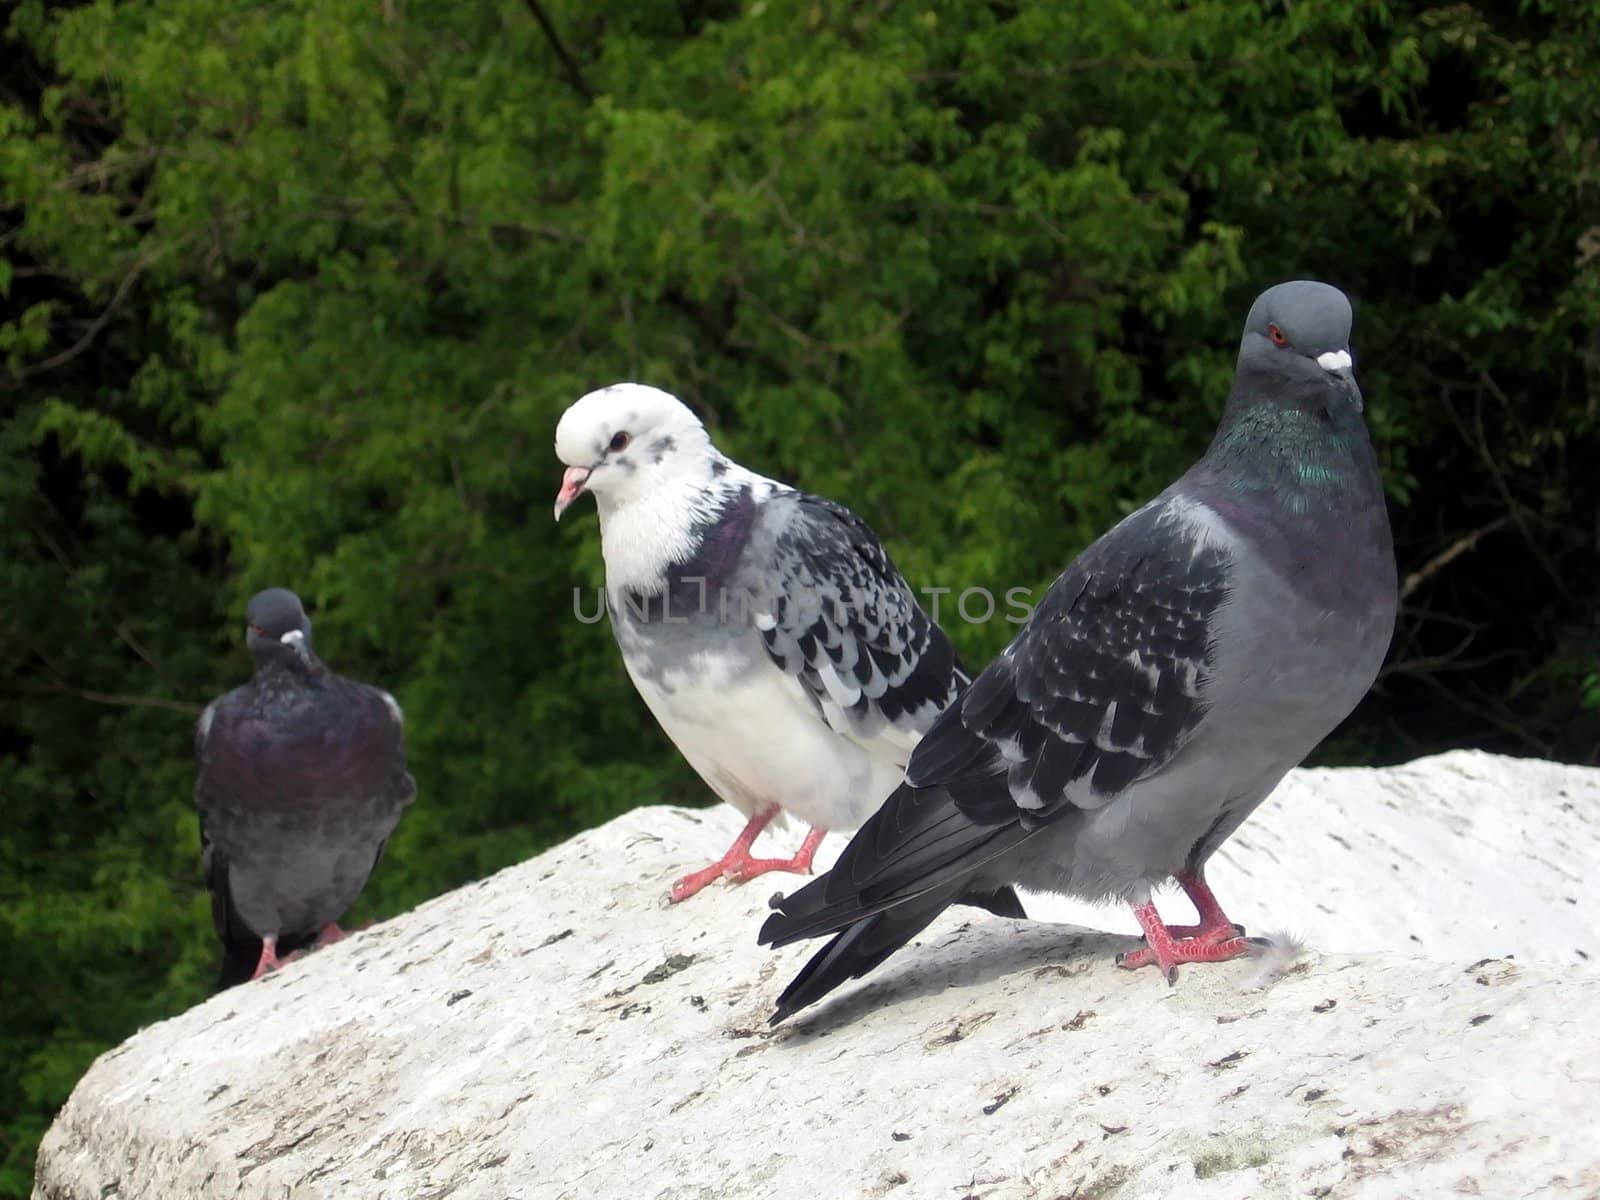 Pigeons by tomatto